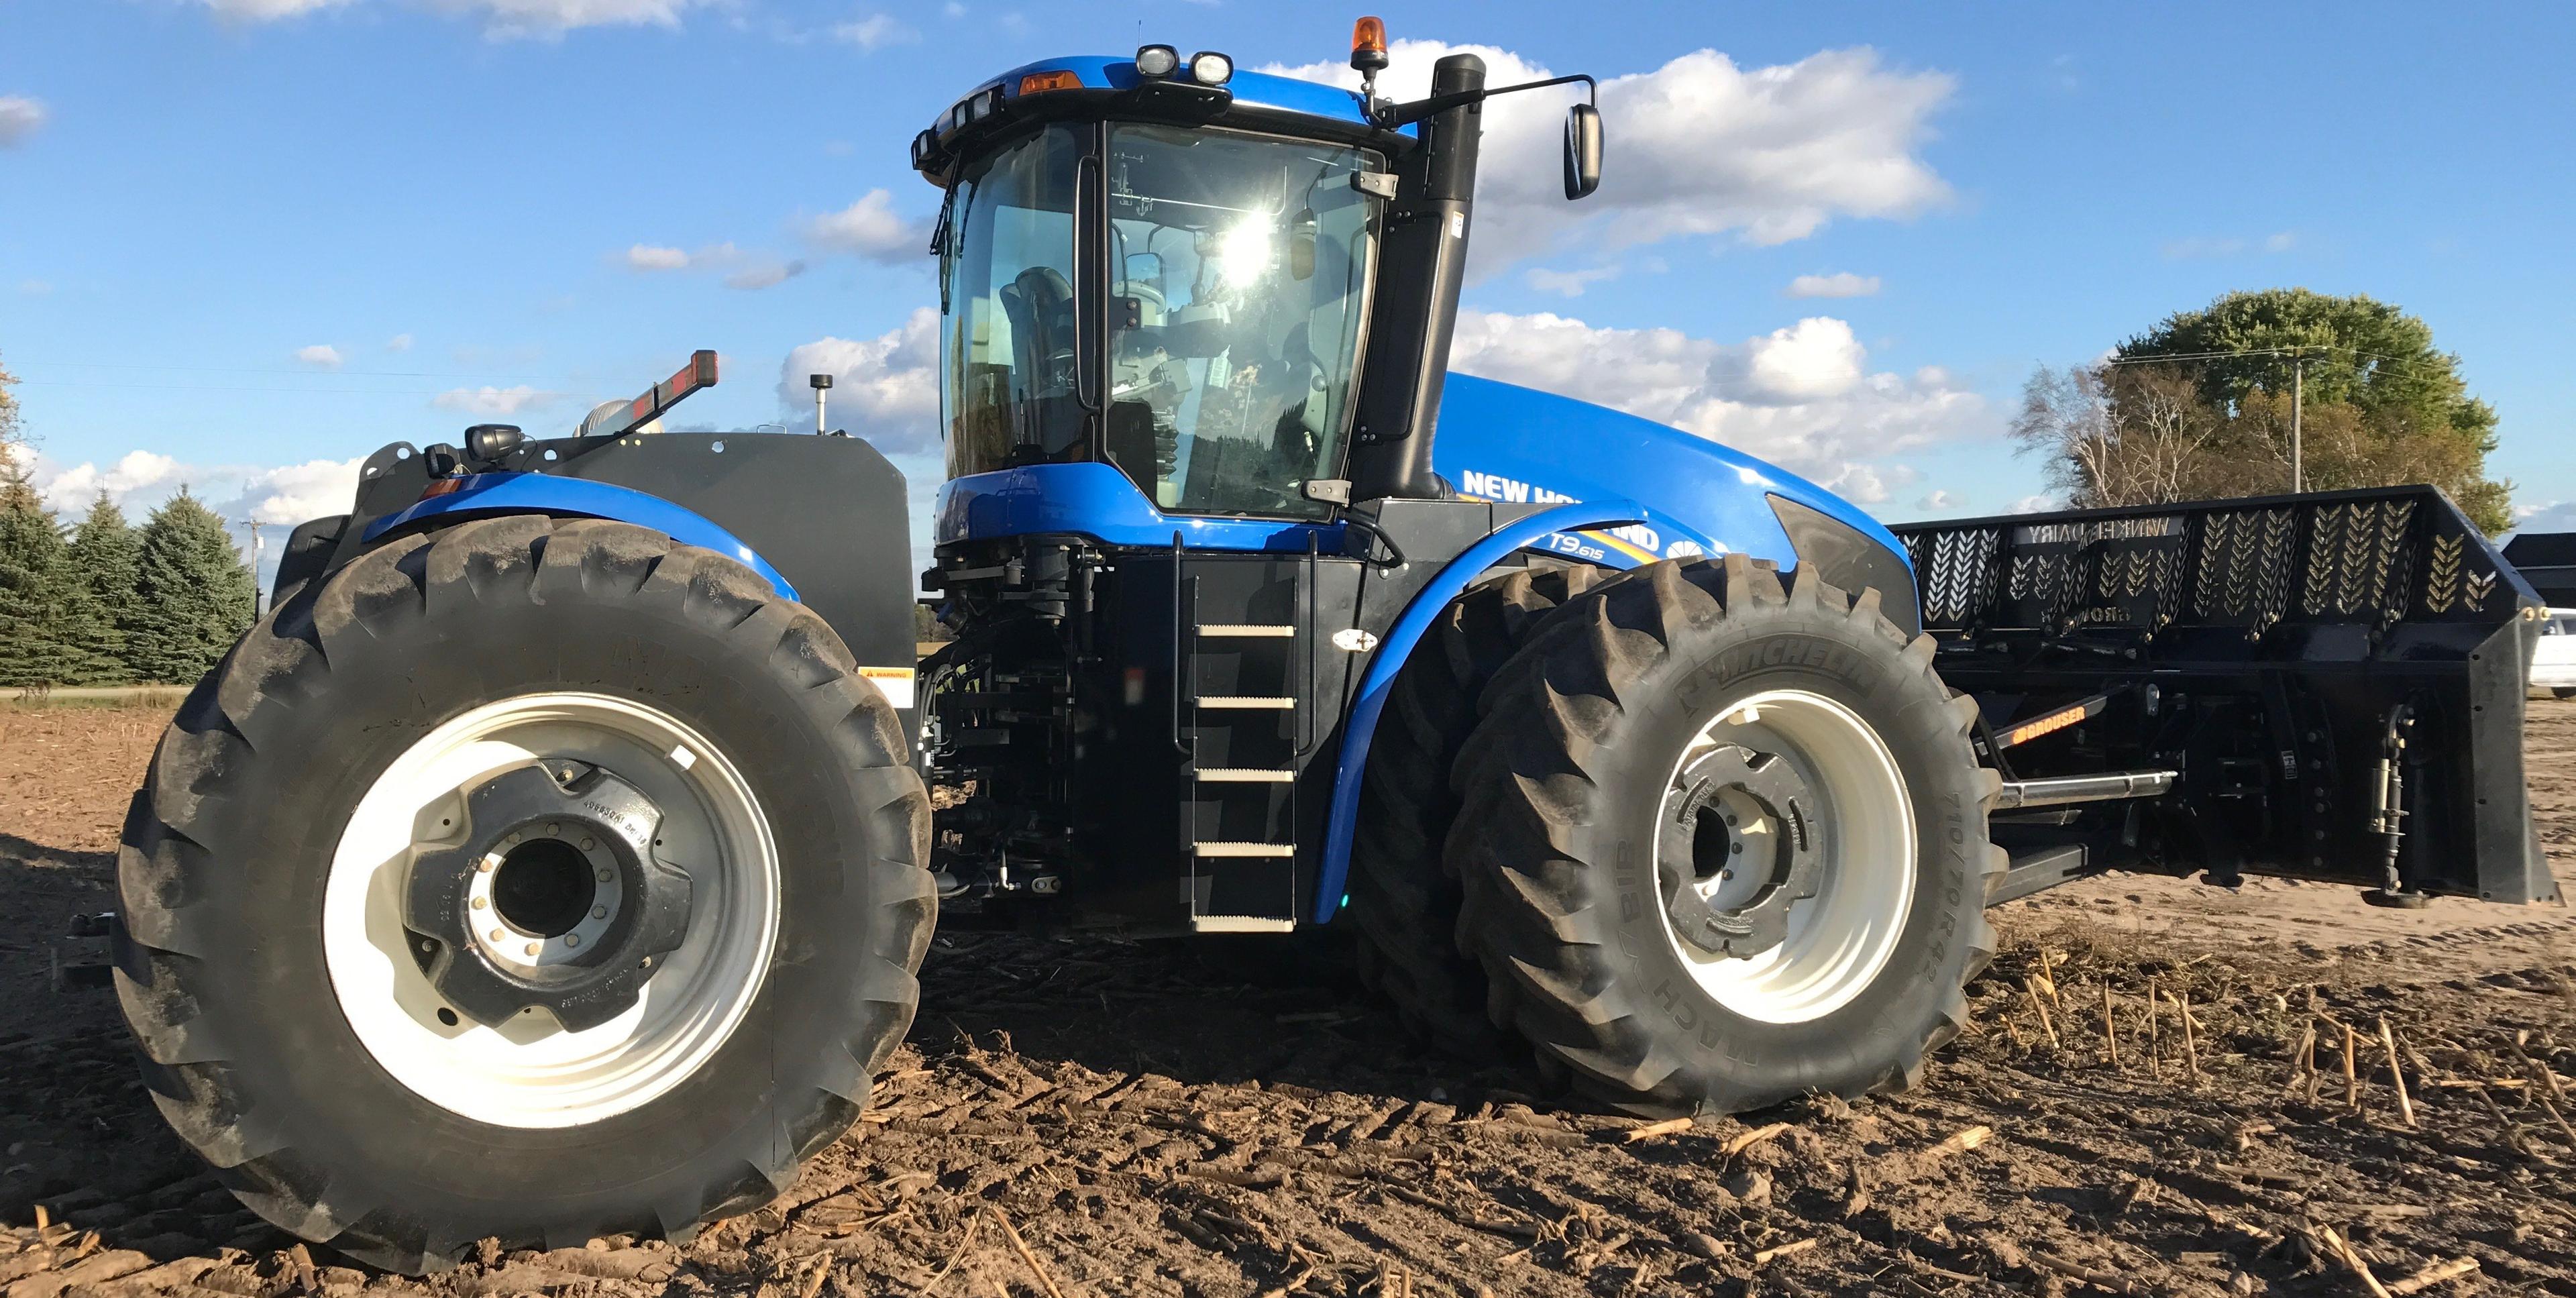 2014 NH T9-615 4WD Tractor